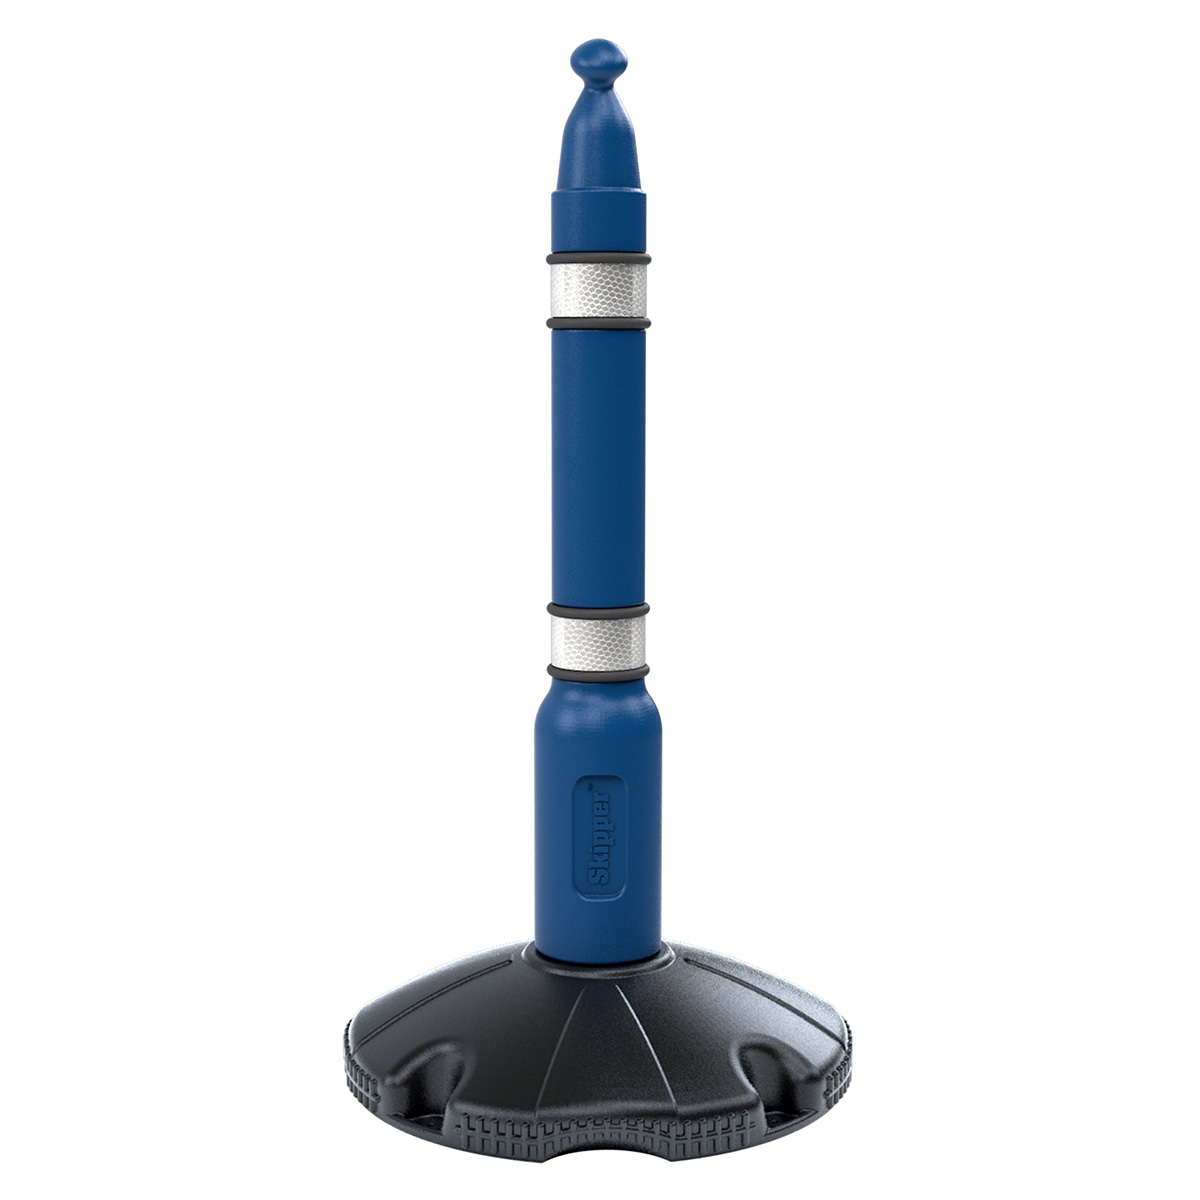 Skipper™ Retractable Barrier Post And Base System in Blue Has a Hollow Water Fillable Base For Stability